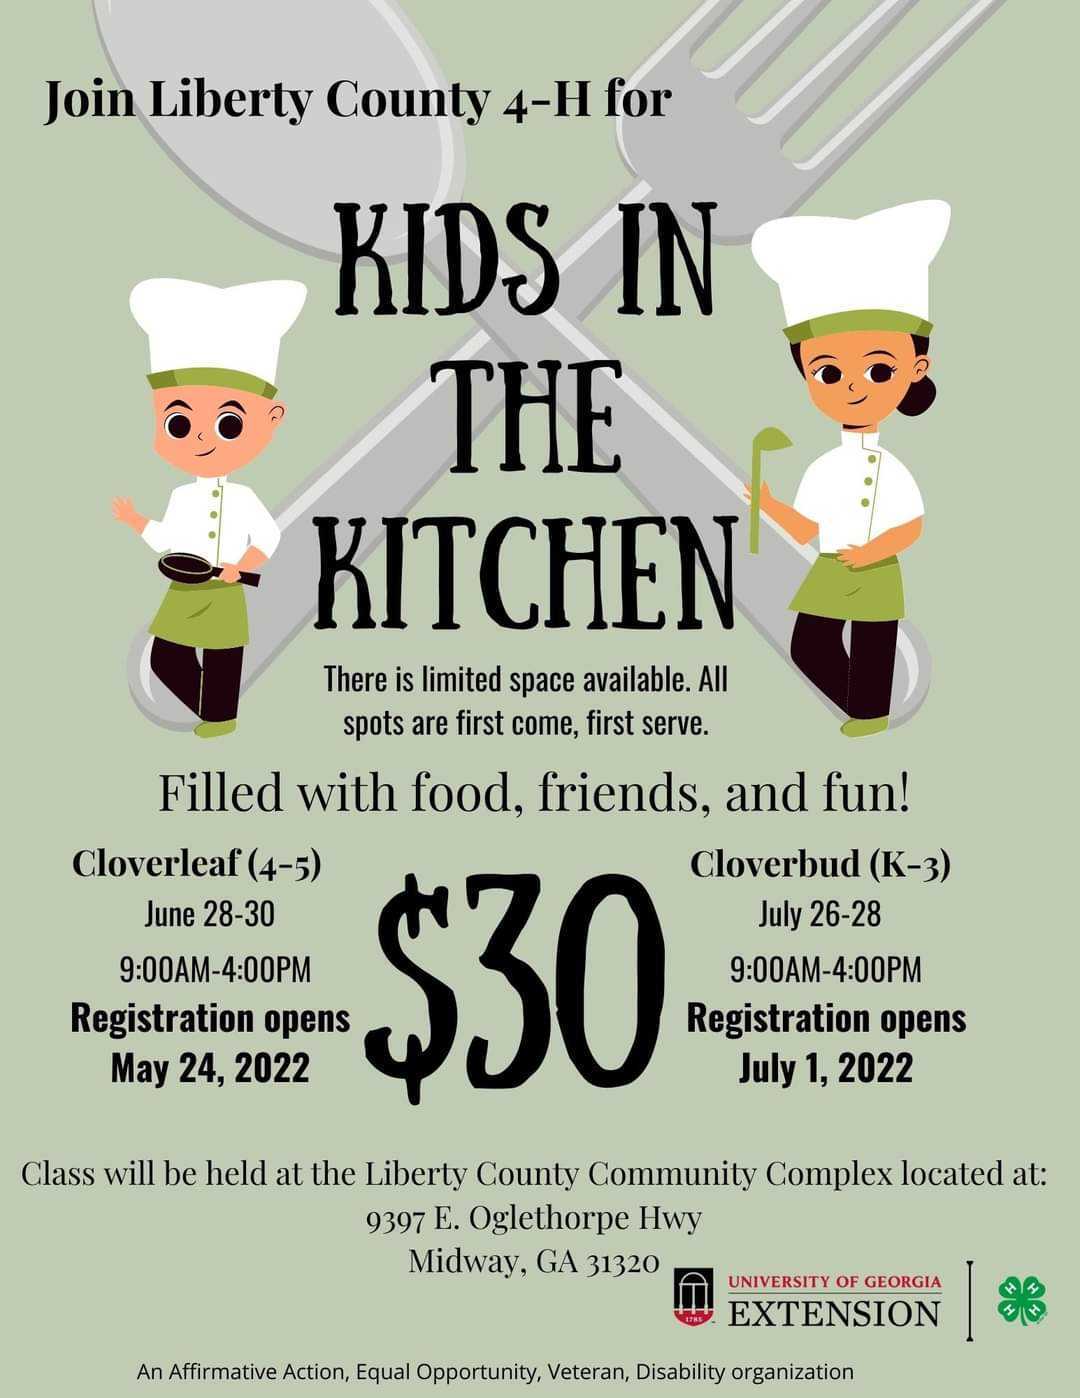 Kids in the Kitchen presented by Liberty County 4-H